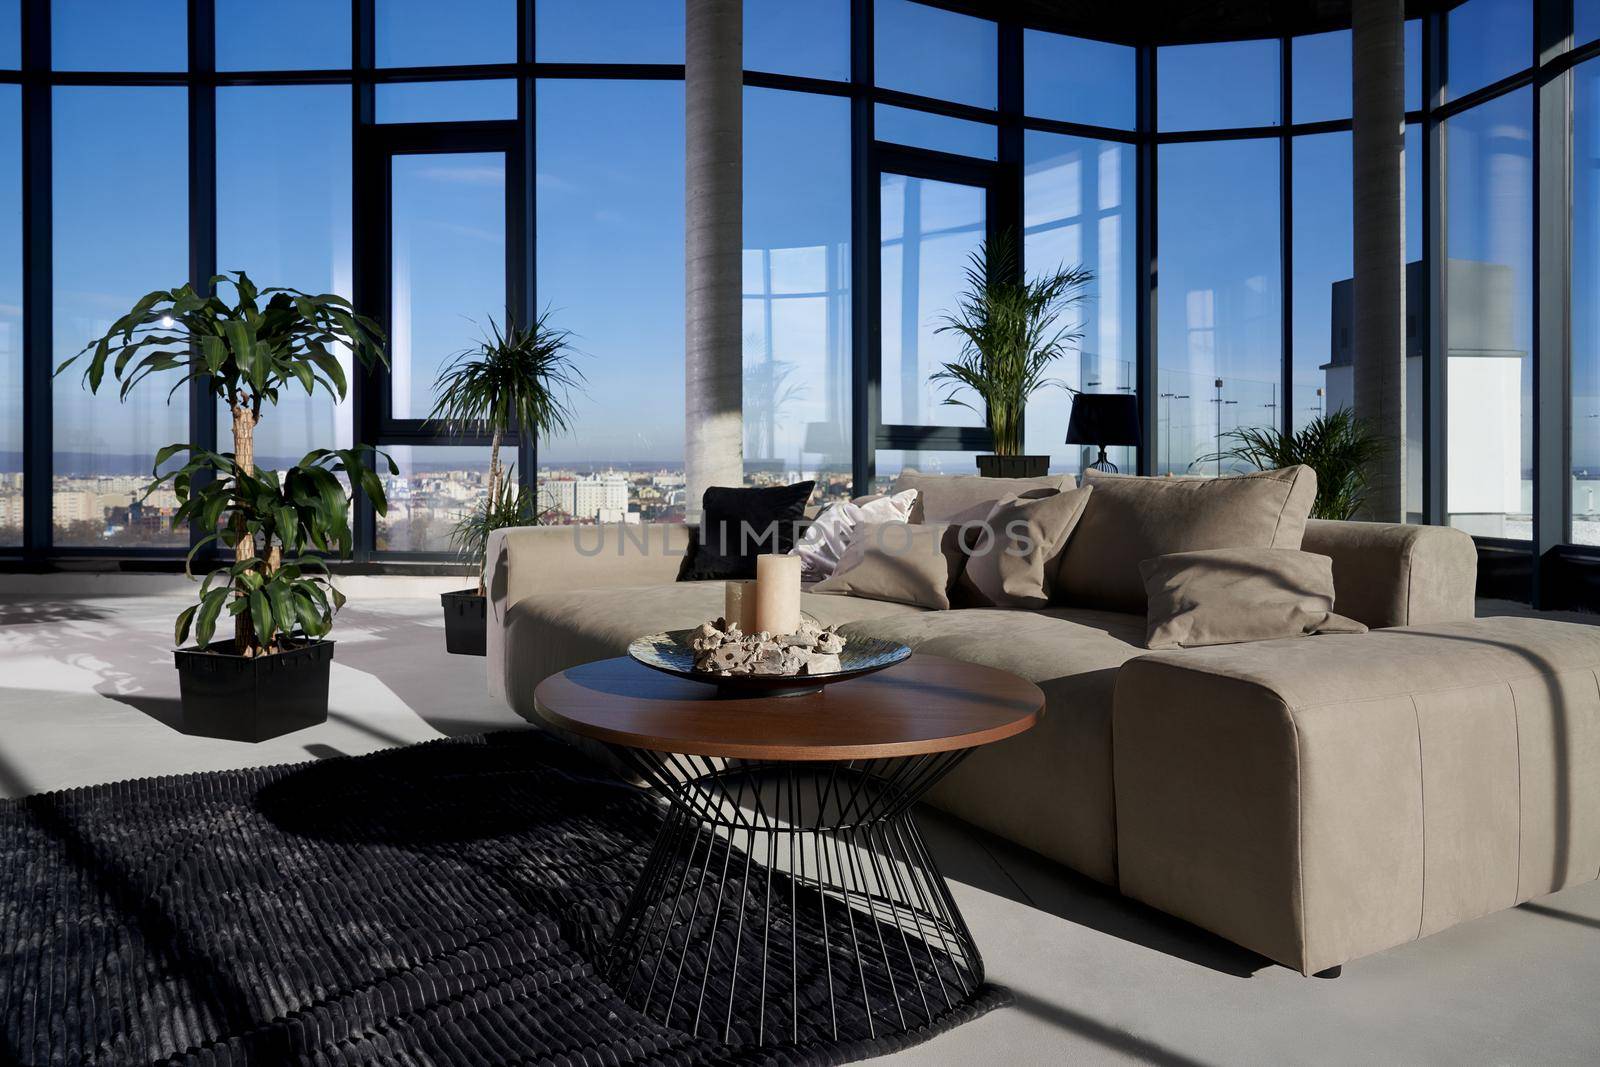 Front view of fashionable interior spacious room with large panoramic window with incredible view on city and cozy grey sofa with pillows and green flowerpots. Concept of modern interior.